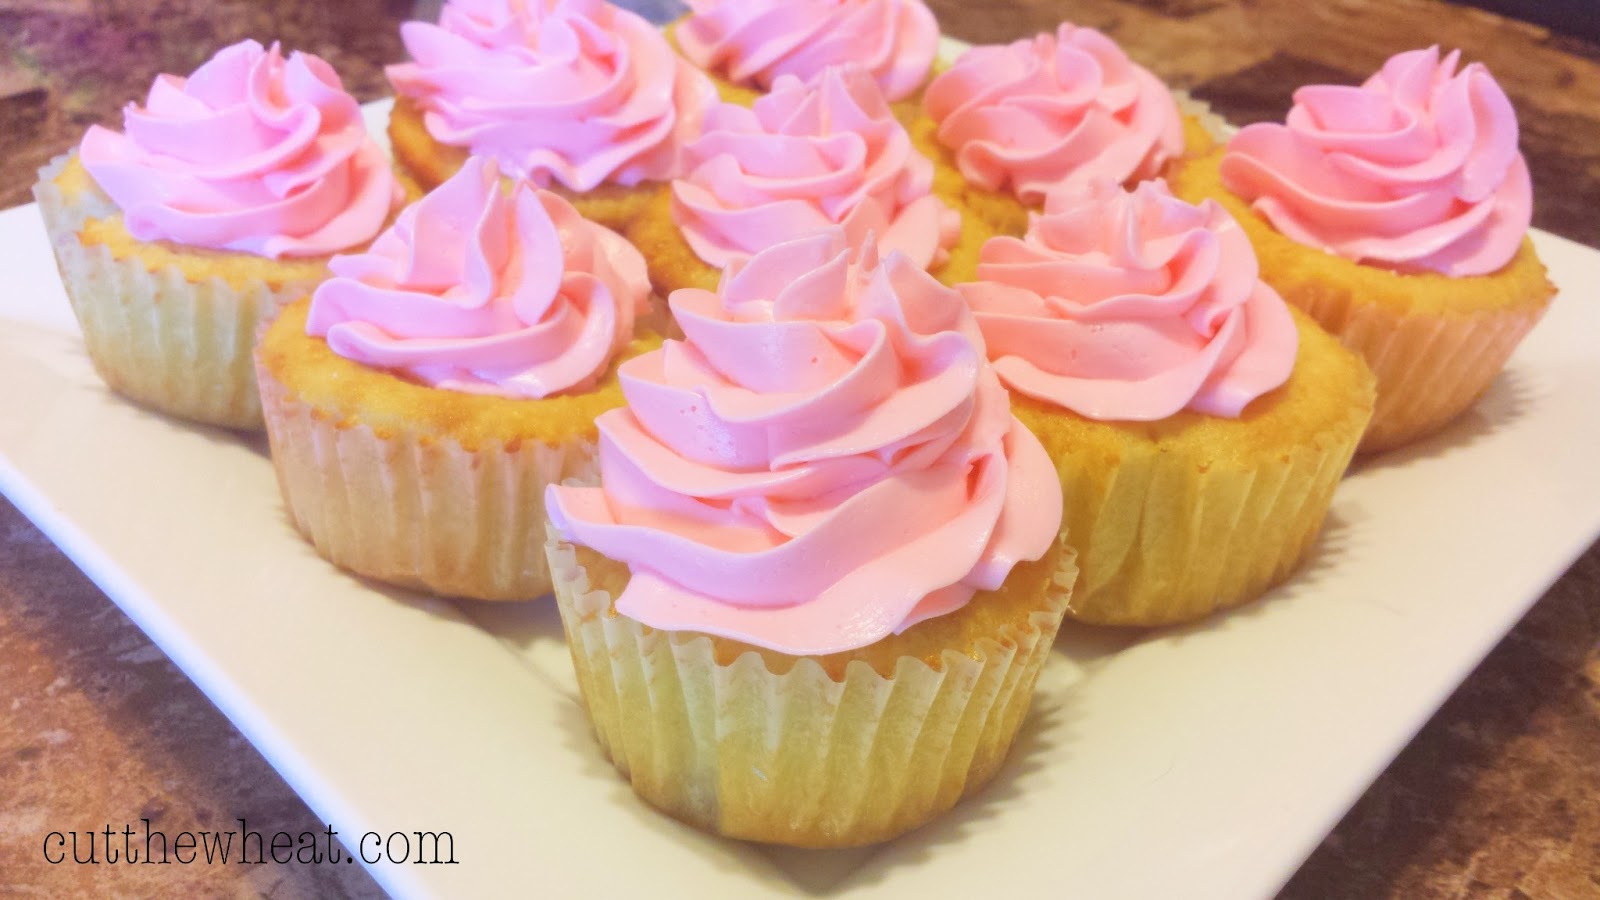 Cupcake with Sugar Free Frosting Recipes